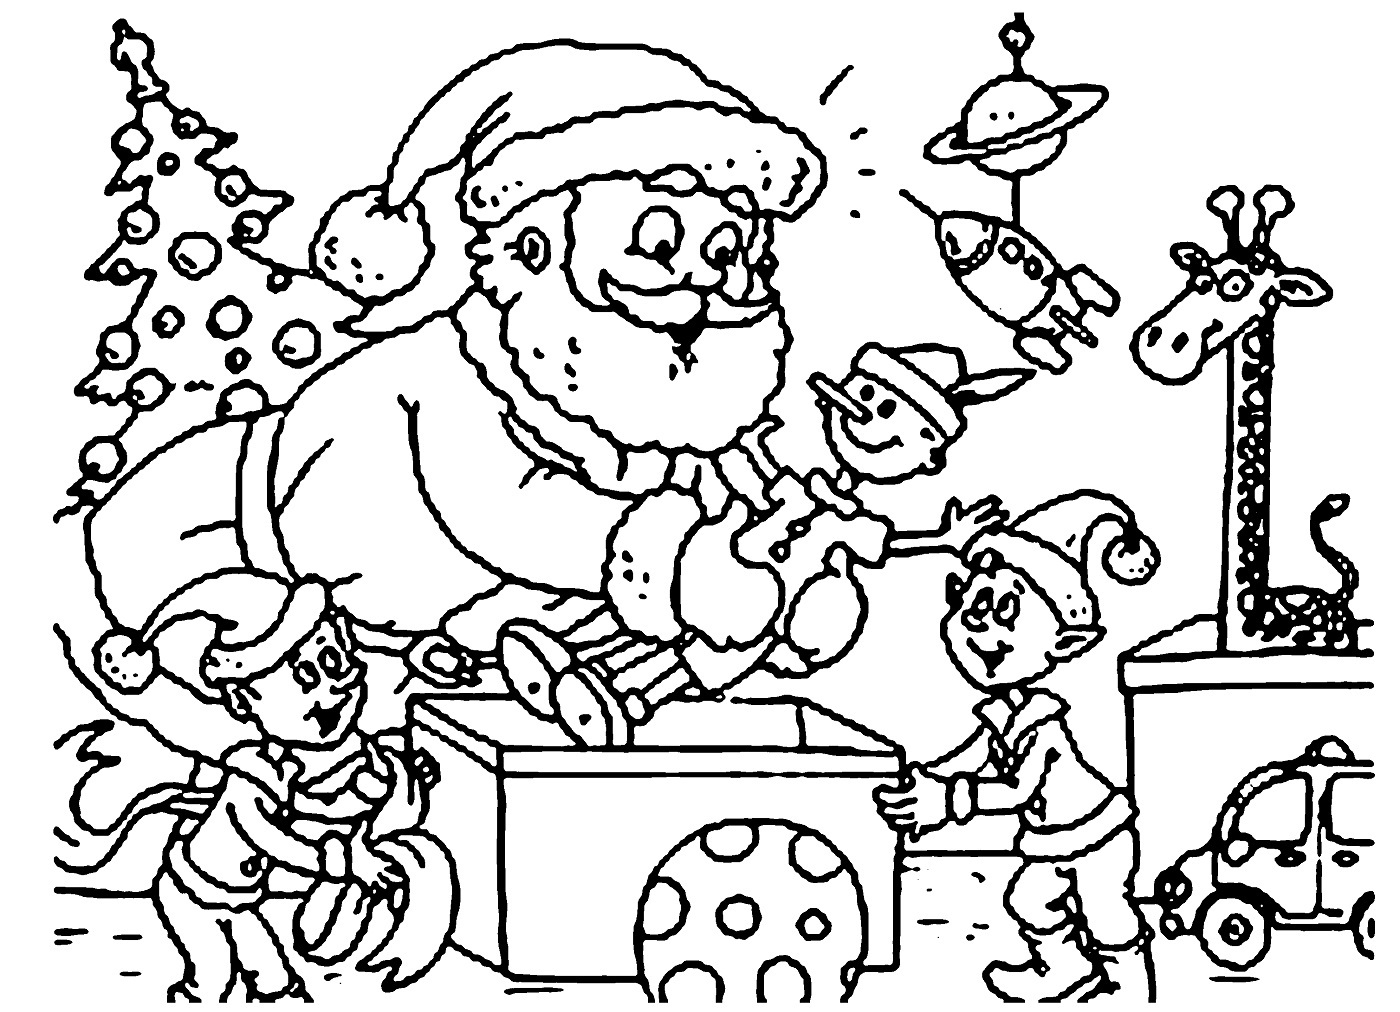 Santa Claus In Sleigh Coloring Page Christmas Santa Drawing At Getdrawings Free For Personal Use